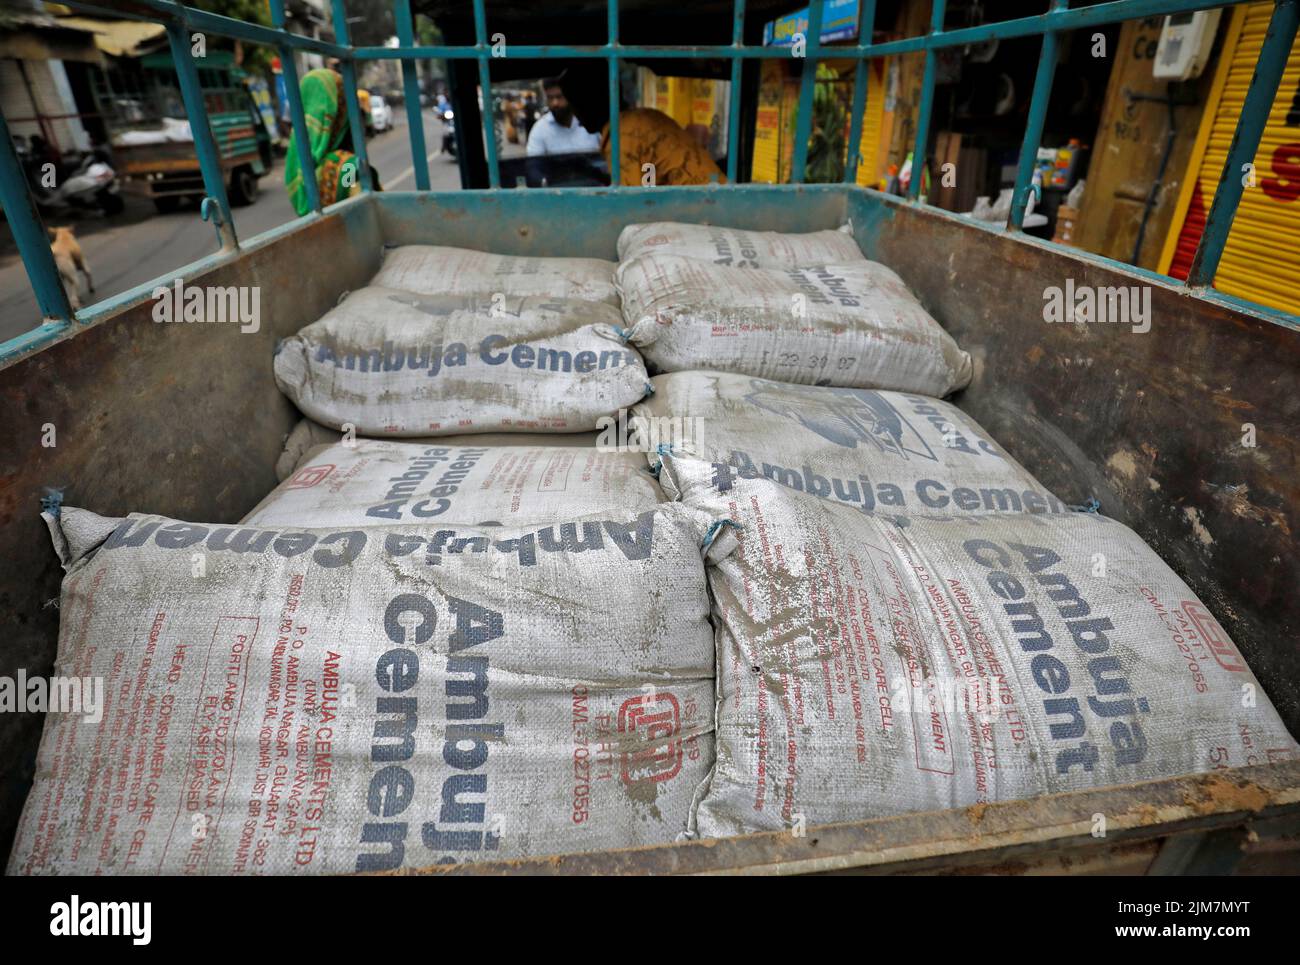 A view shows Ambuja Cement bags, to be carried to a construction site, in a load carrier in Ahmedabad, India, July 29, 2022. REUTERS/Amit Dave Stock Photo